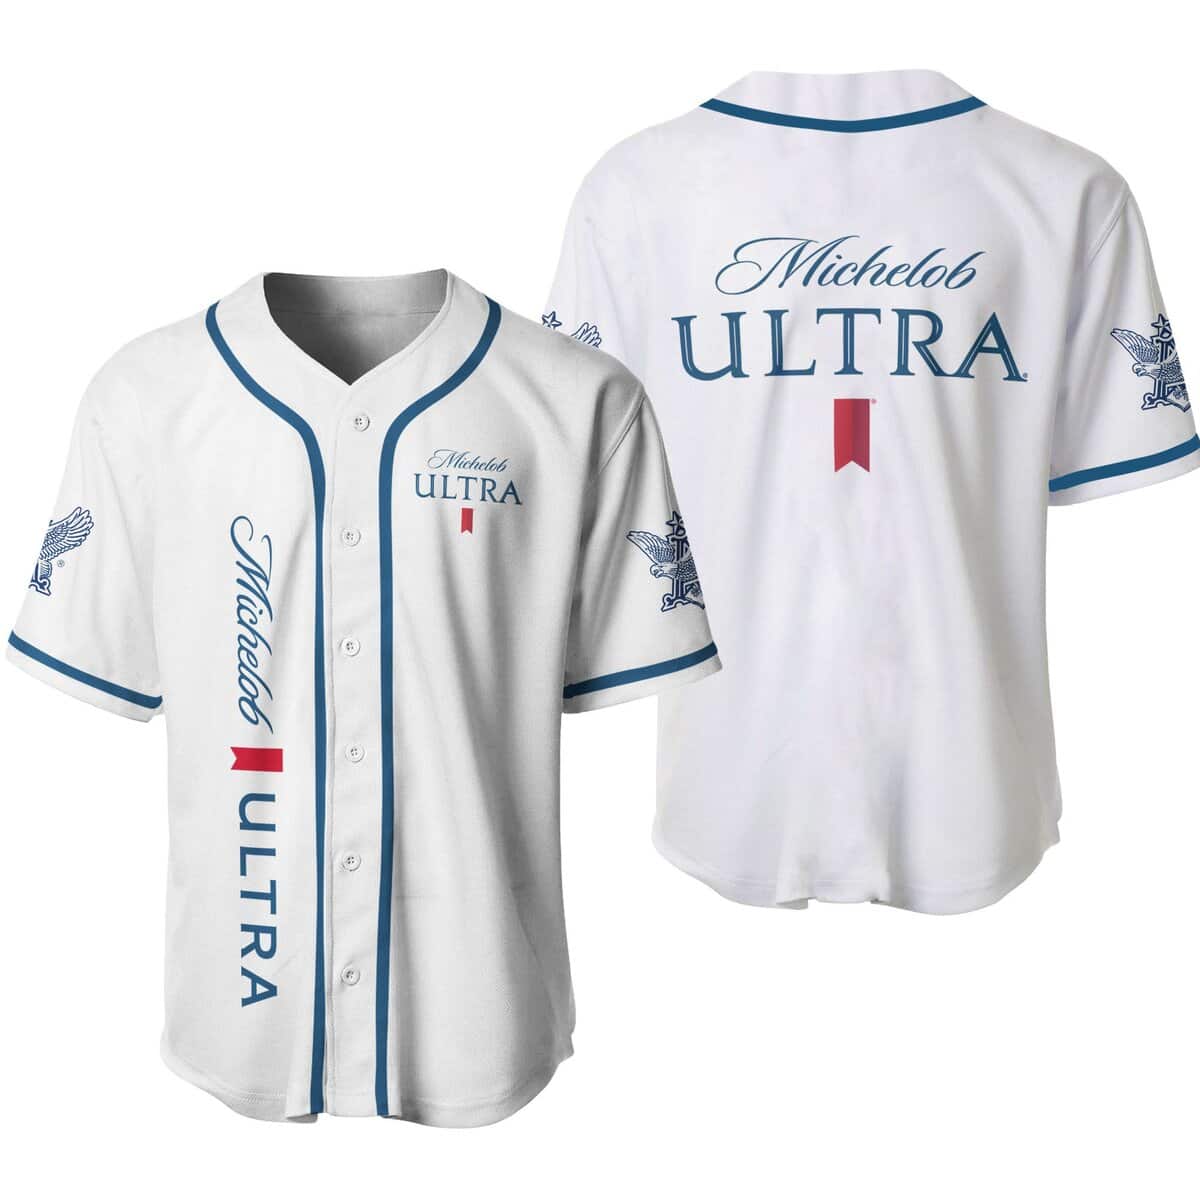 White Michelob ULTRA Beer Baseball Jersey Sports Gift For Dad